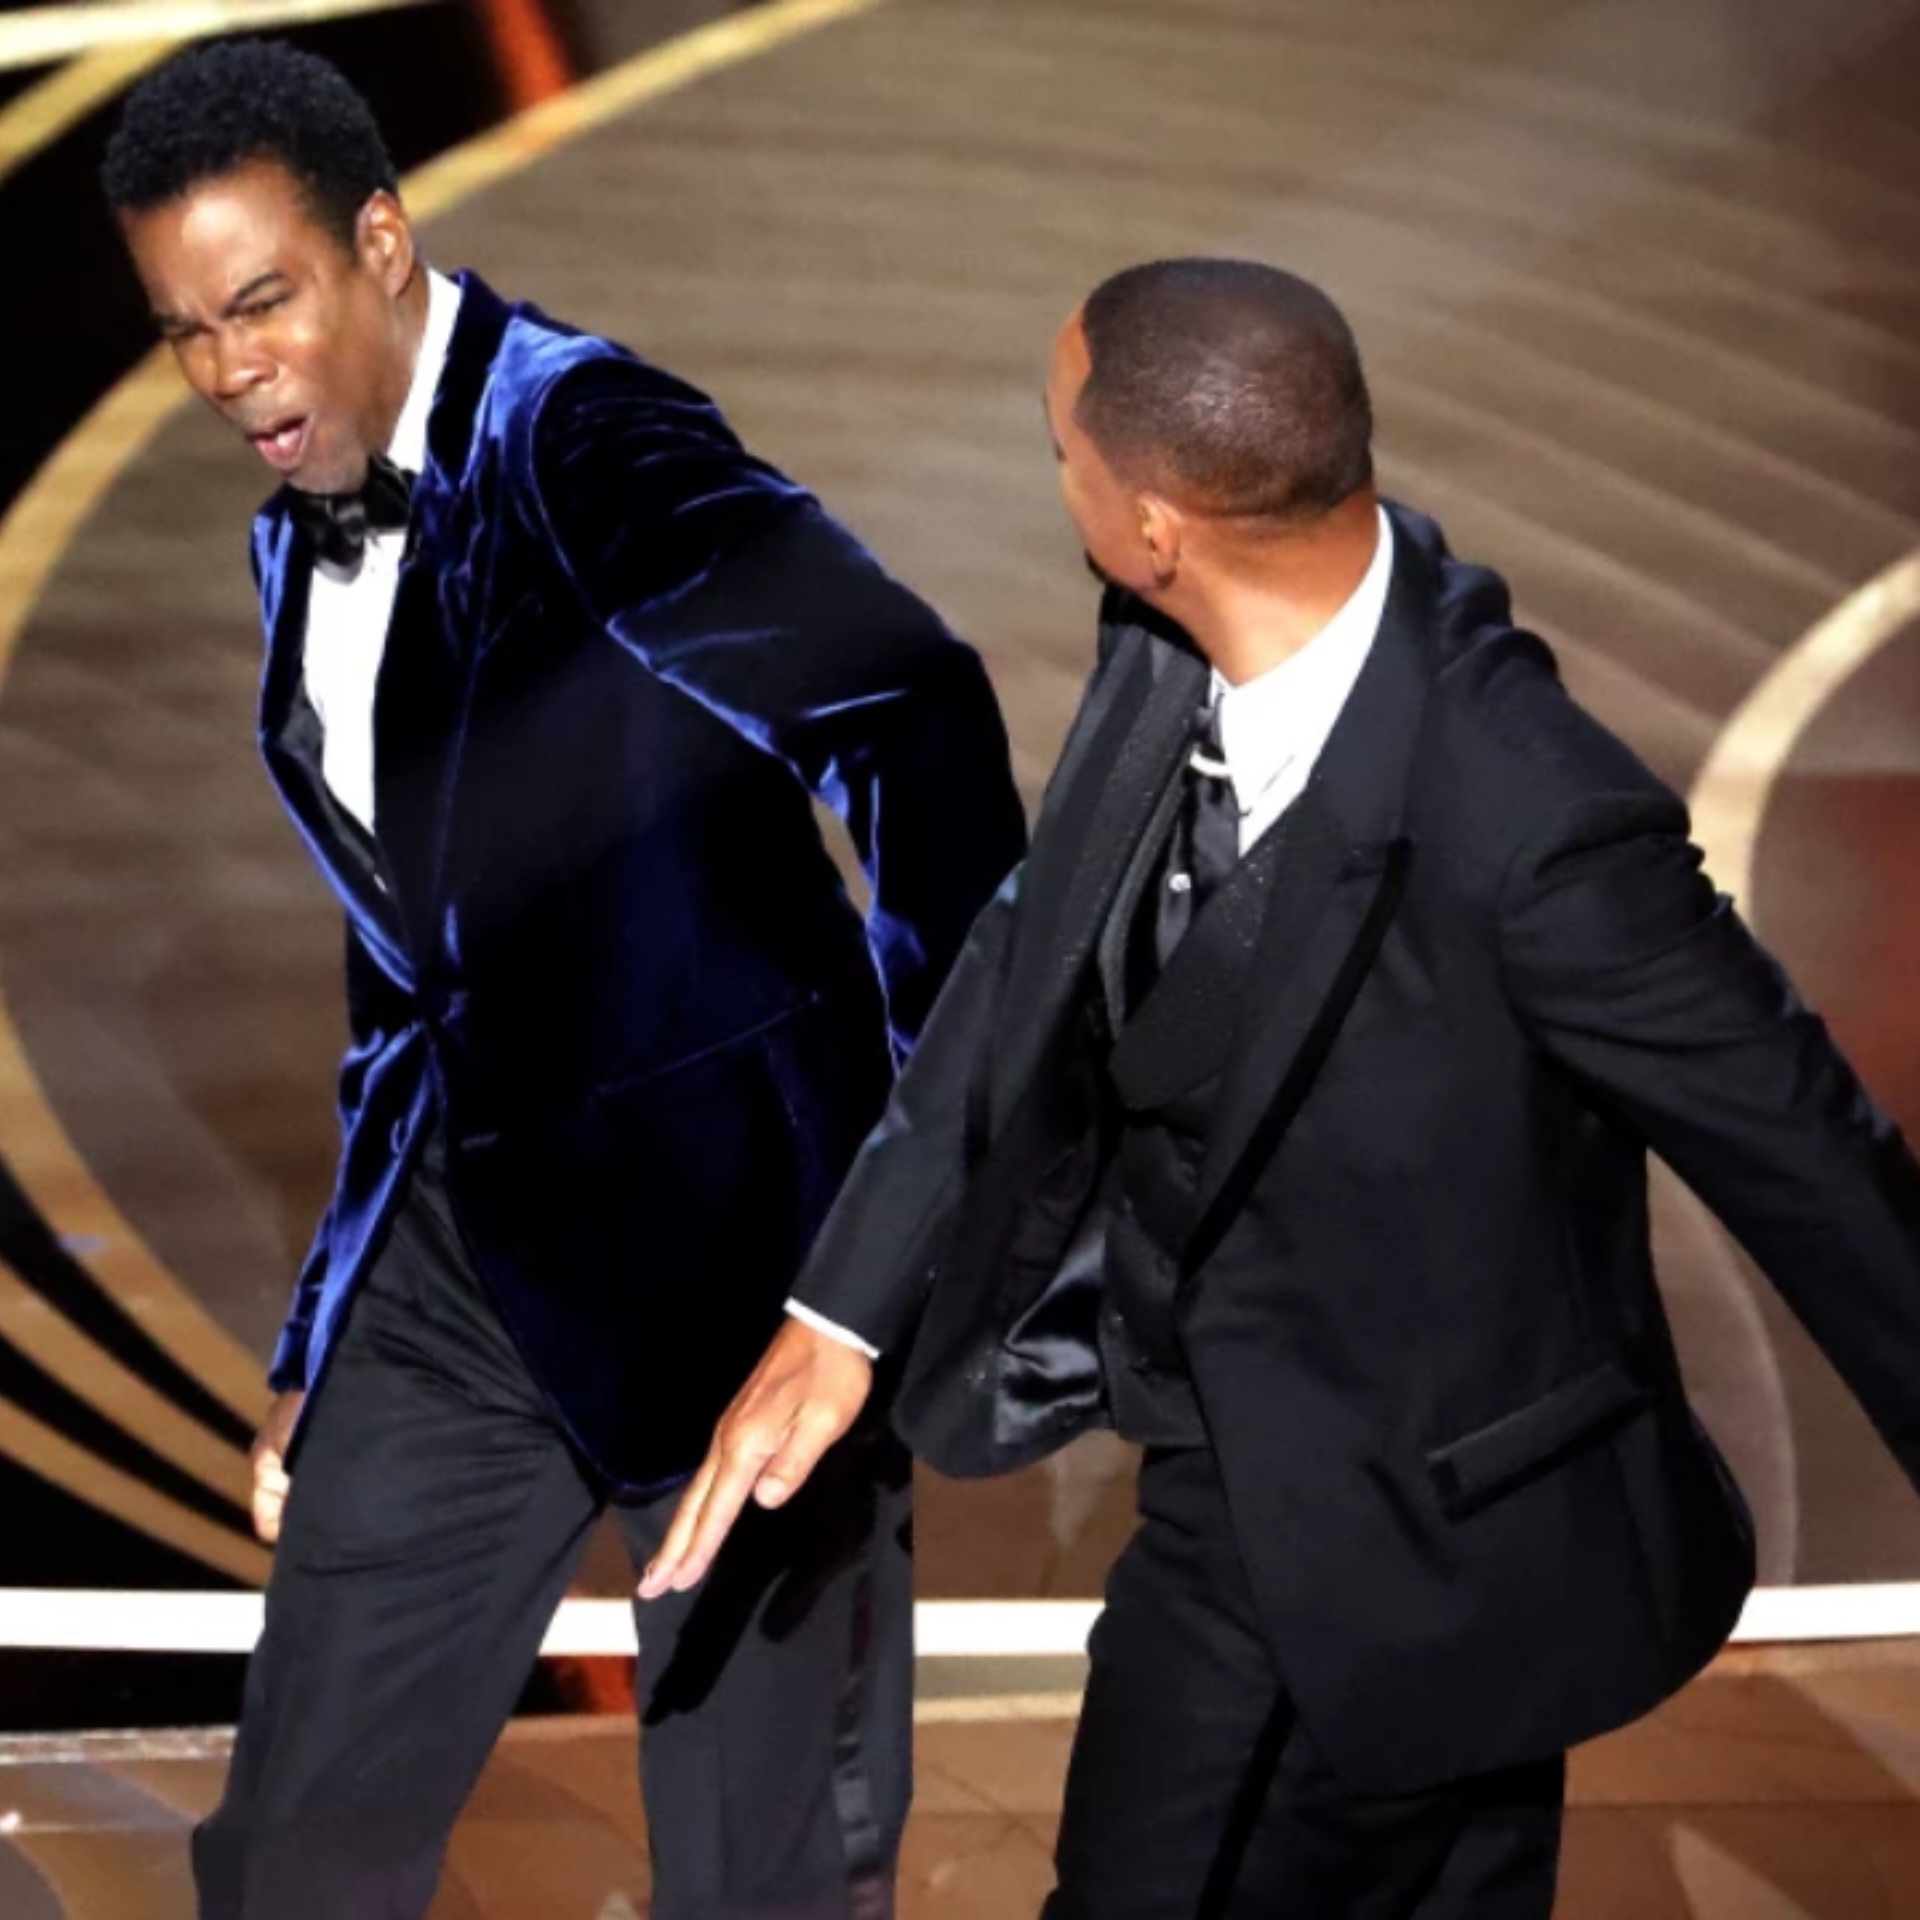 Will Smith slaps Chris Rock on stage of Oscars 2022.